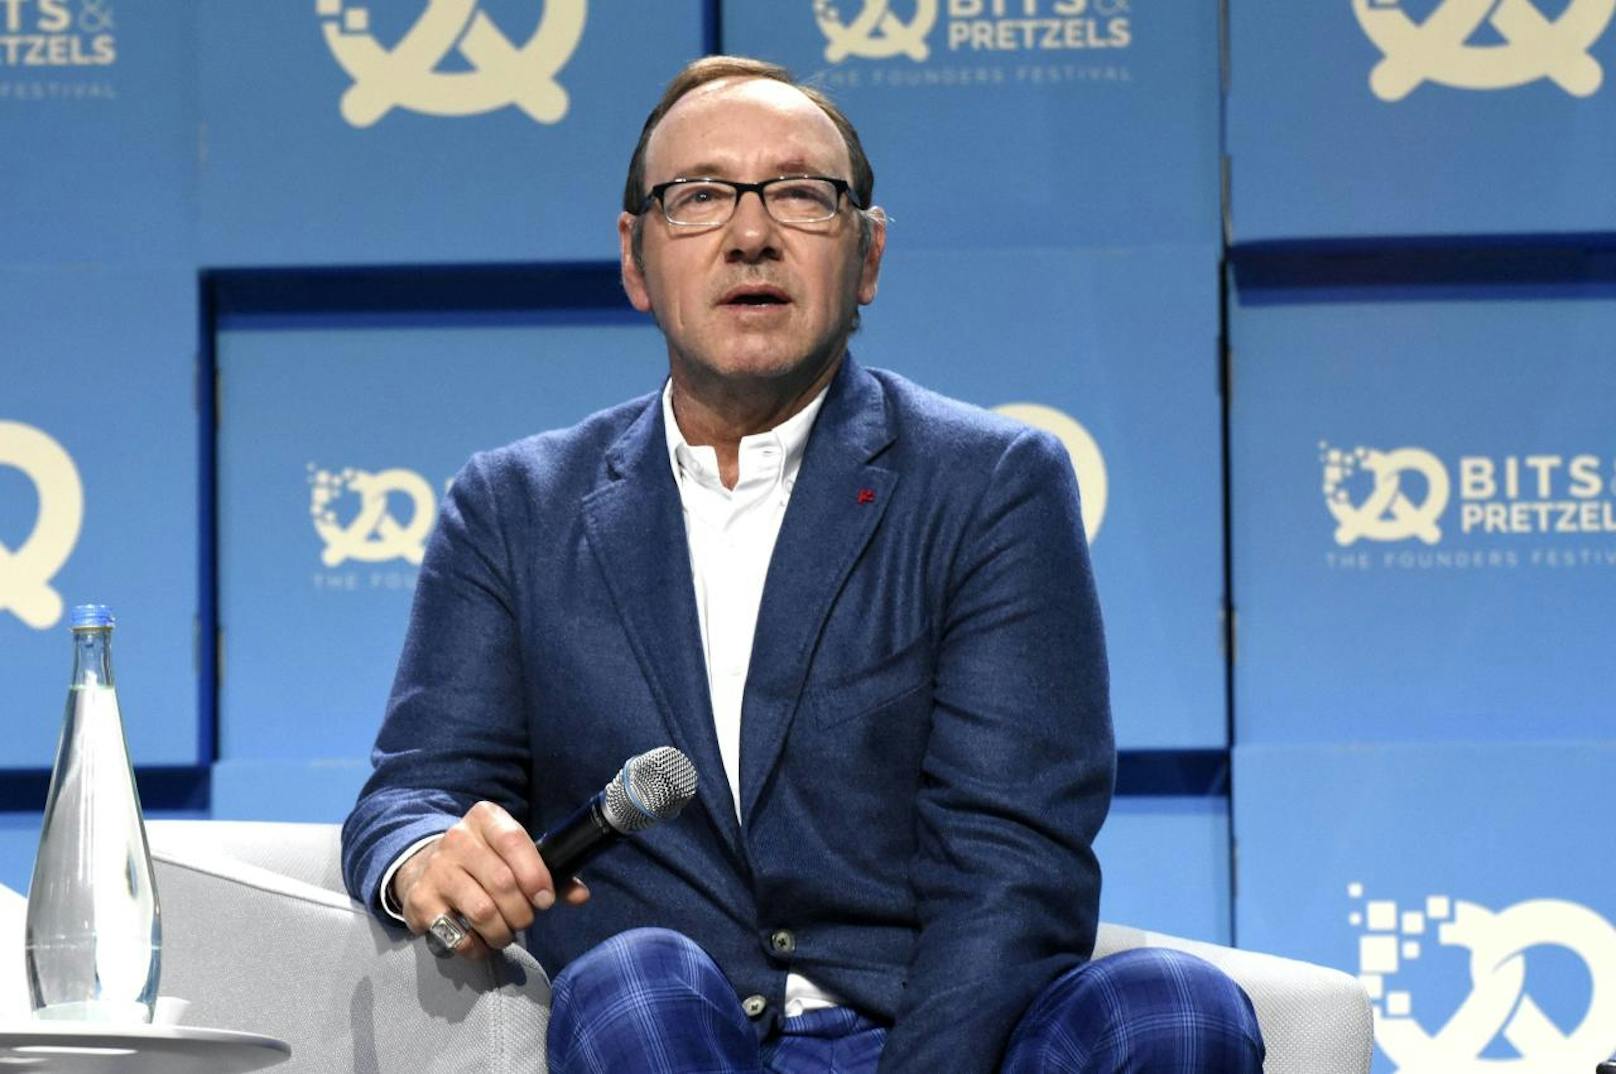 Kevin Spacey beim Founders Festival im September 2017 in München